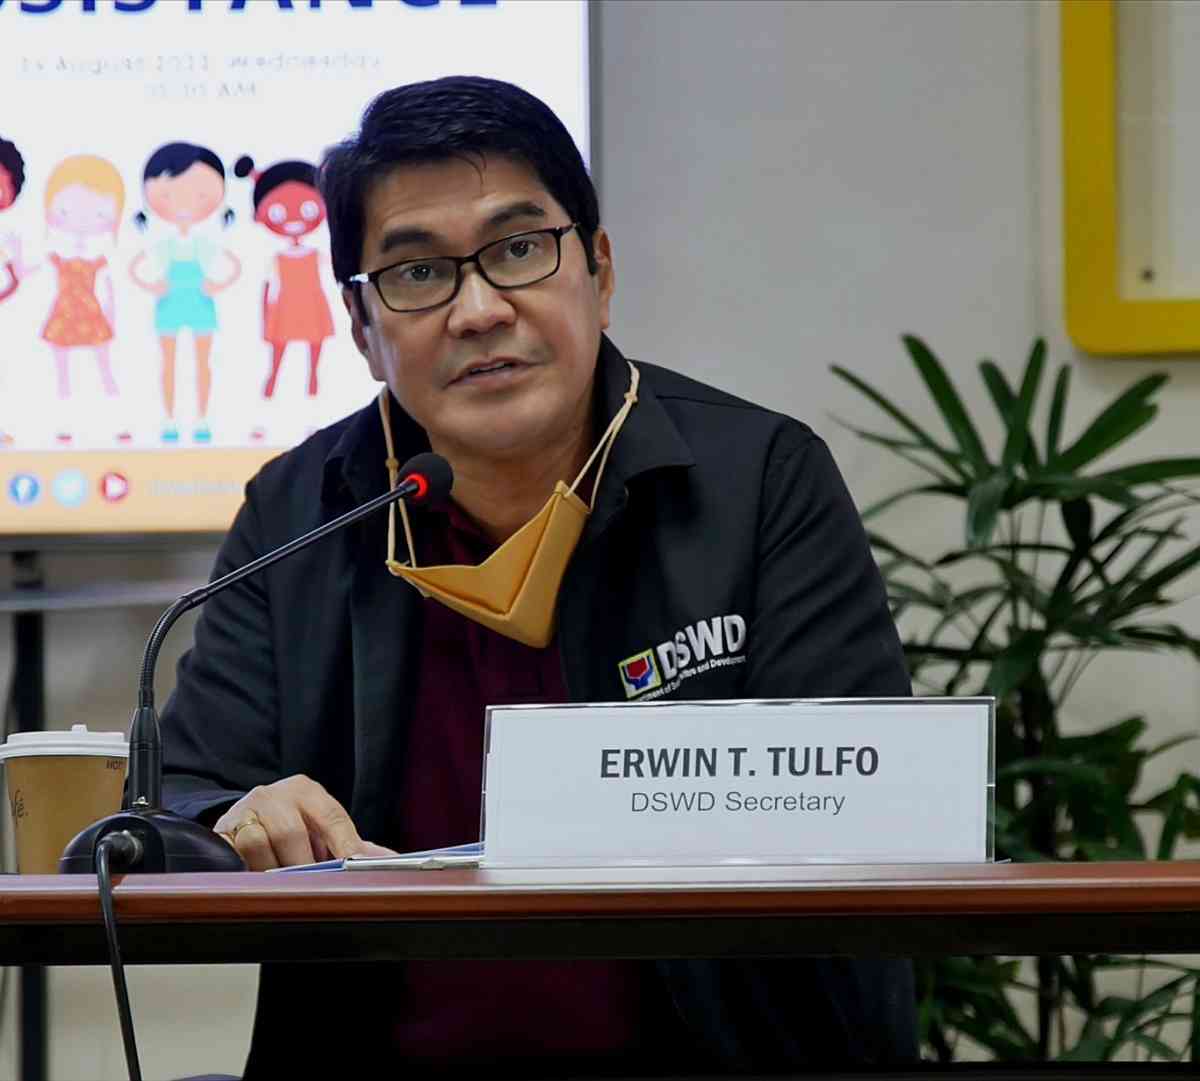 No more walk-ins for DWSD's educational aid, says Tulfo